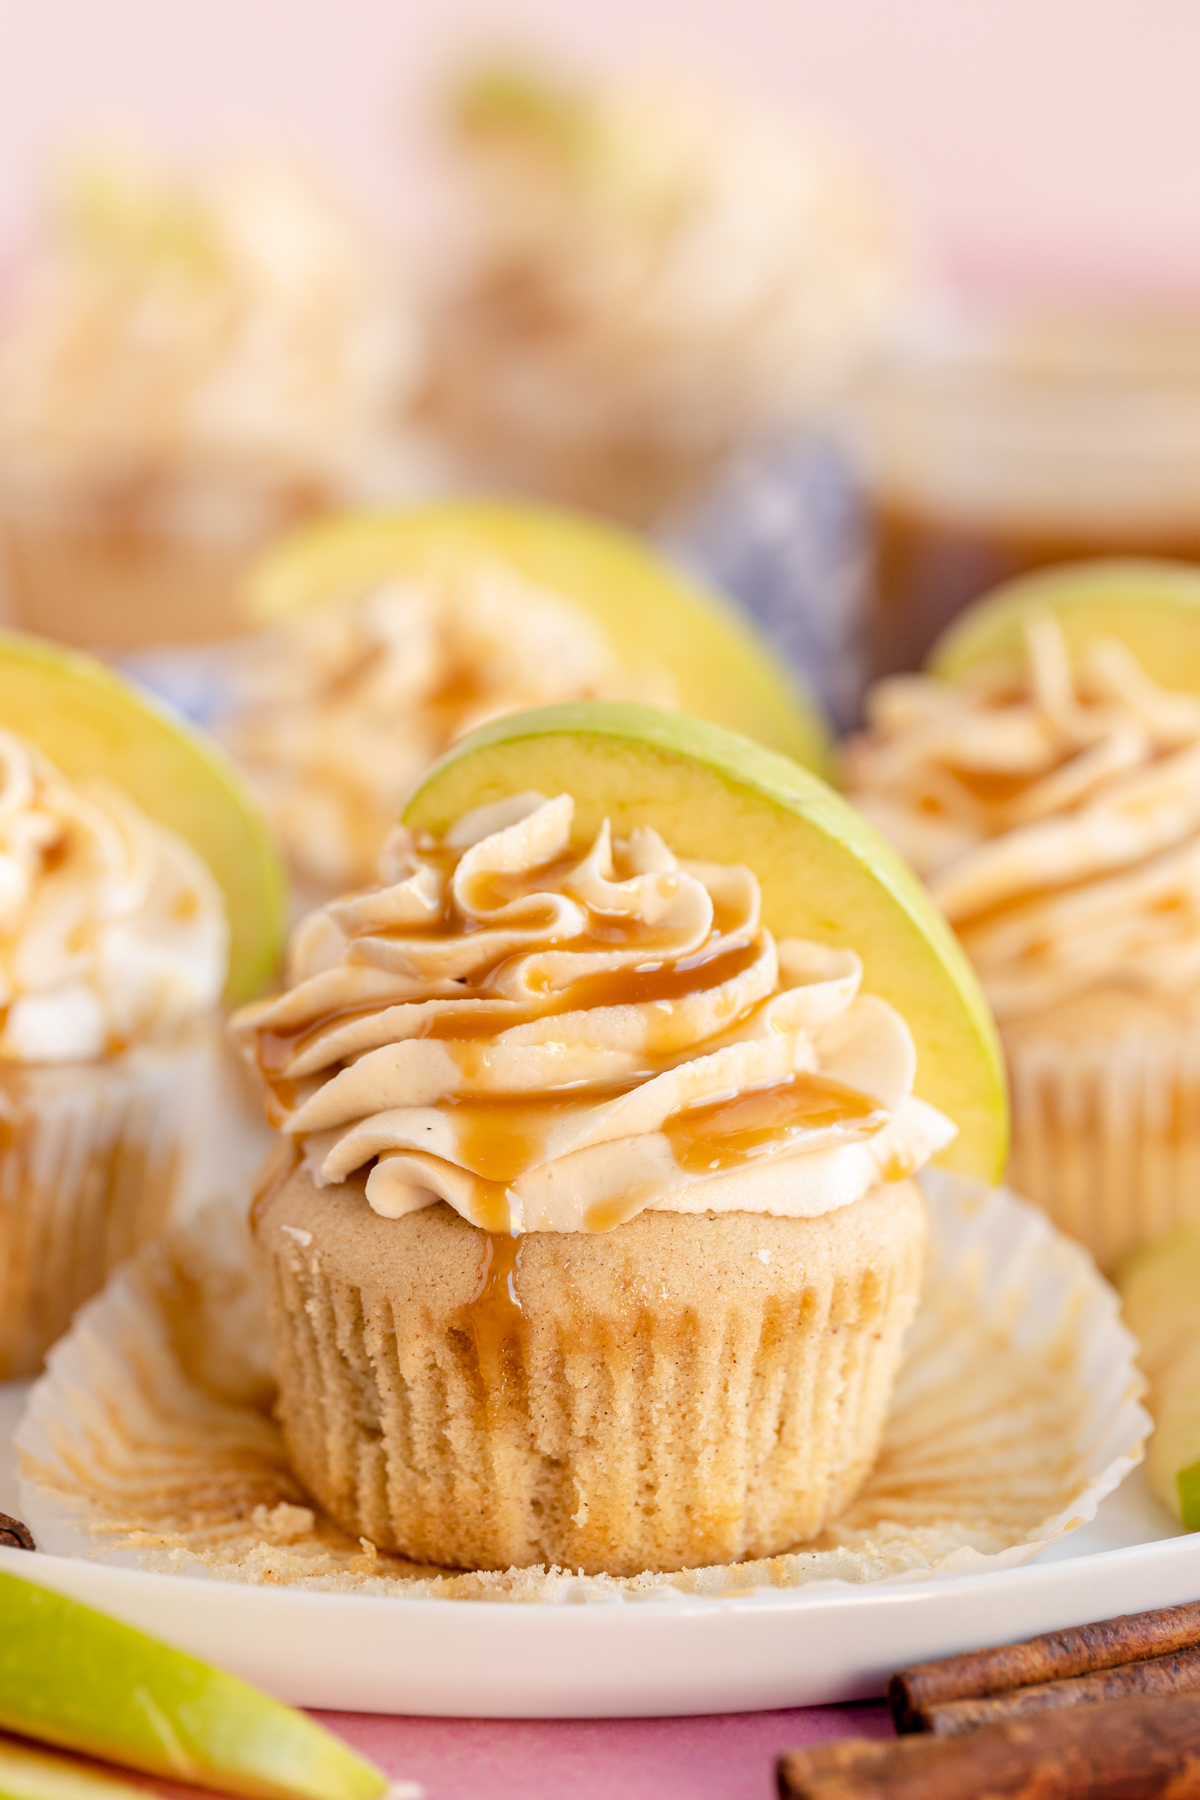 caramel apple cupcake with caramel drizzle and an apple slice